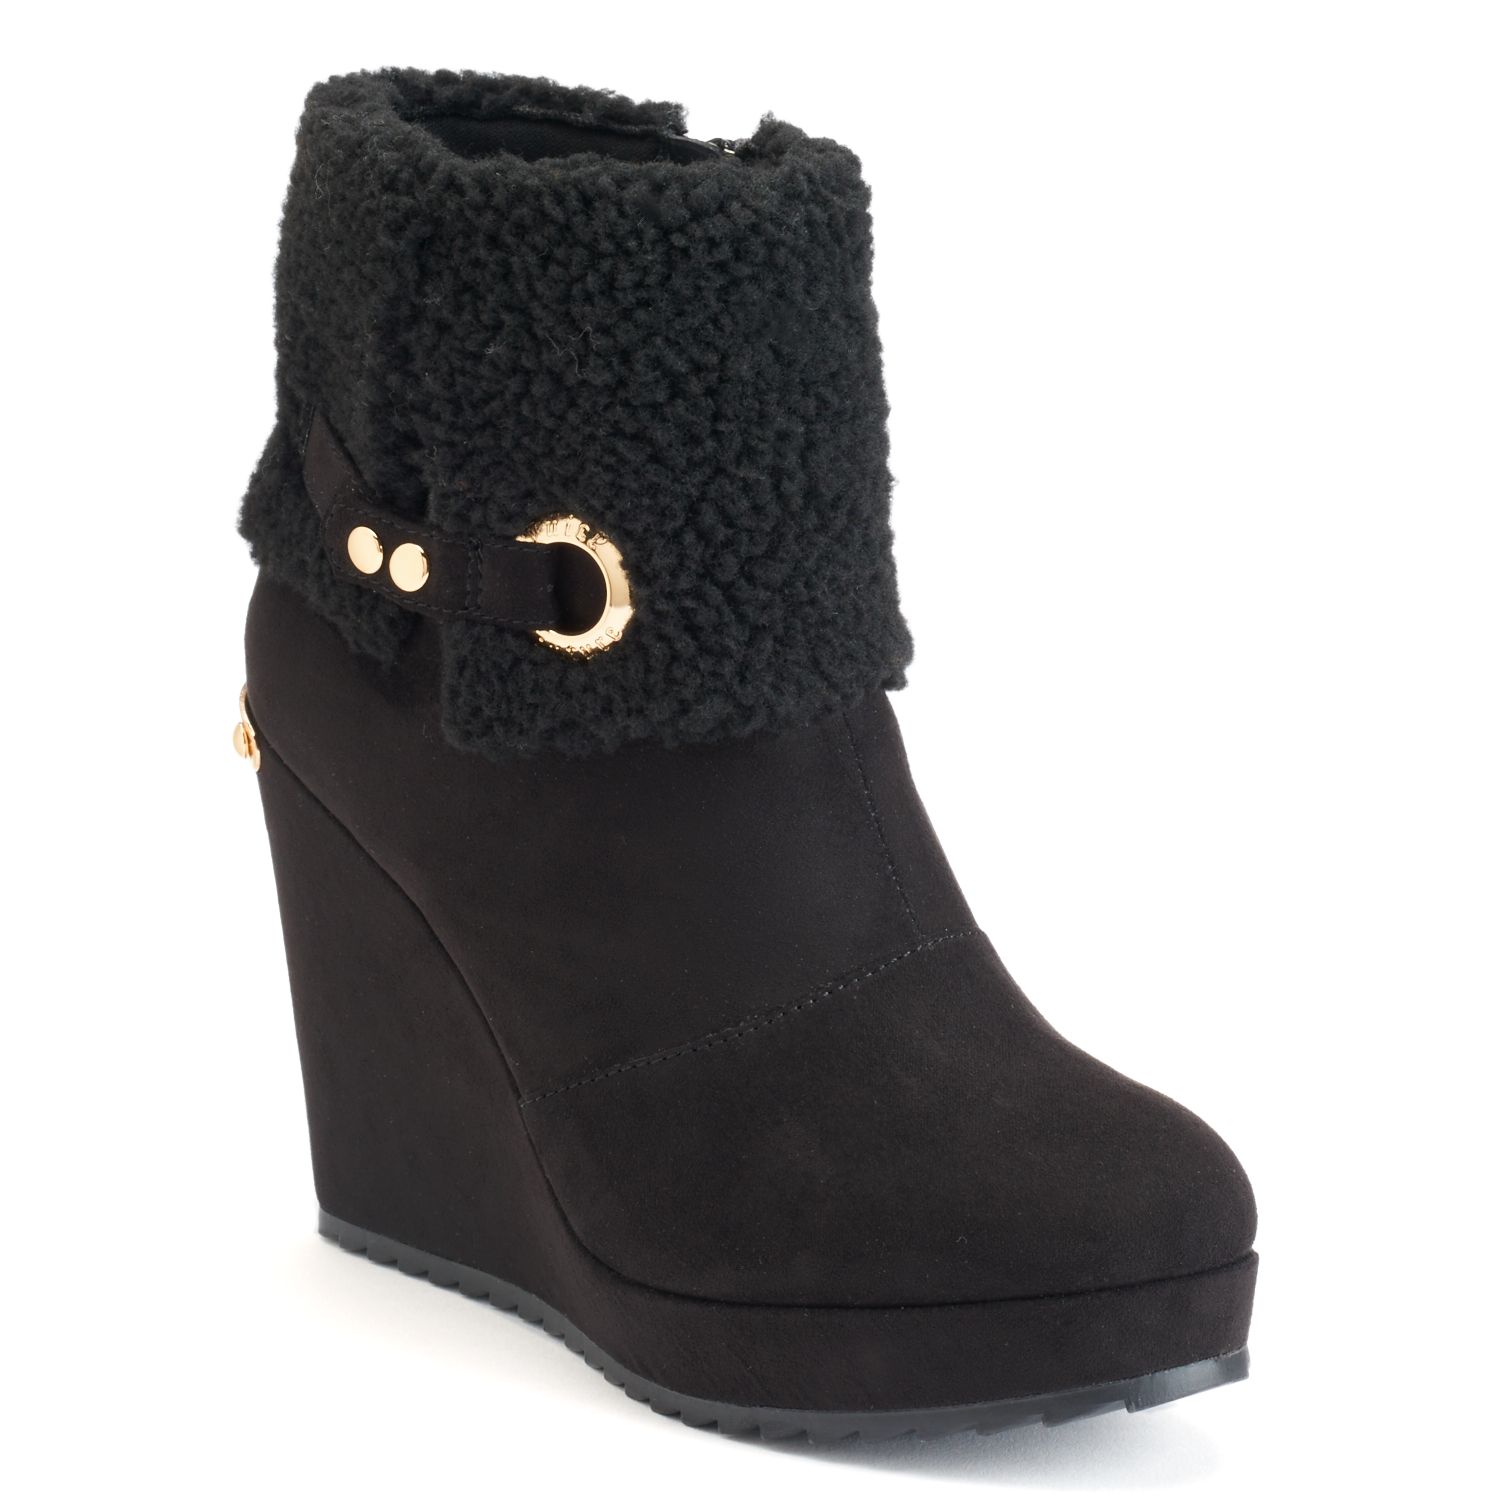 Buckle Wedge Ankle Boots